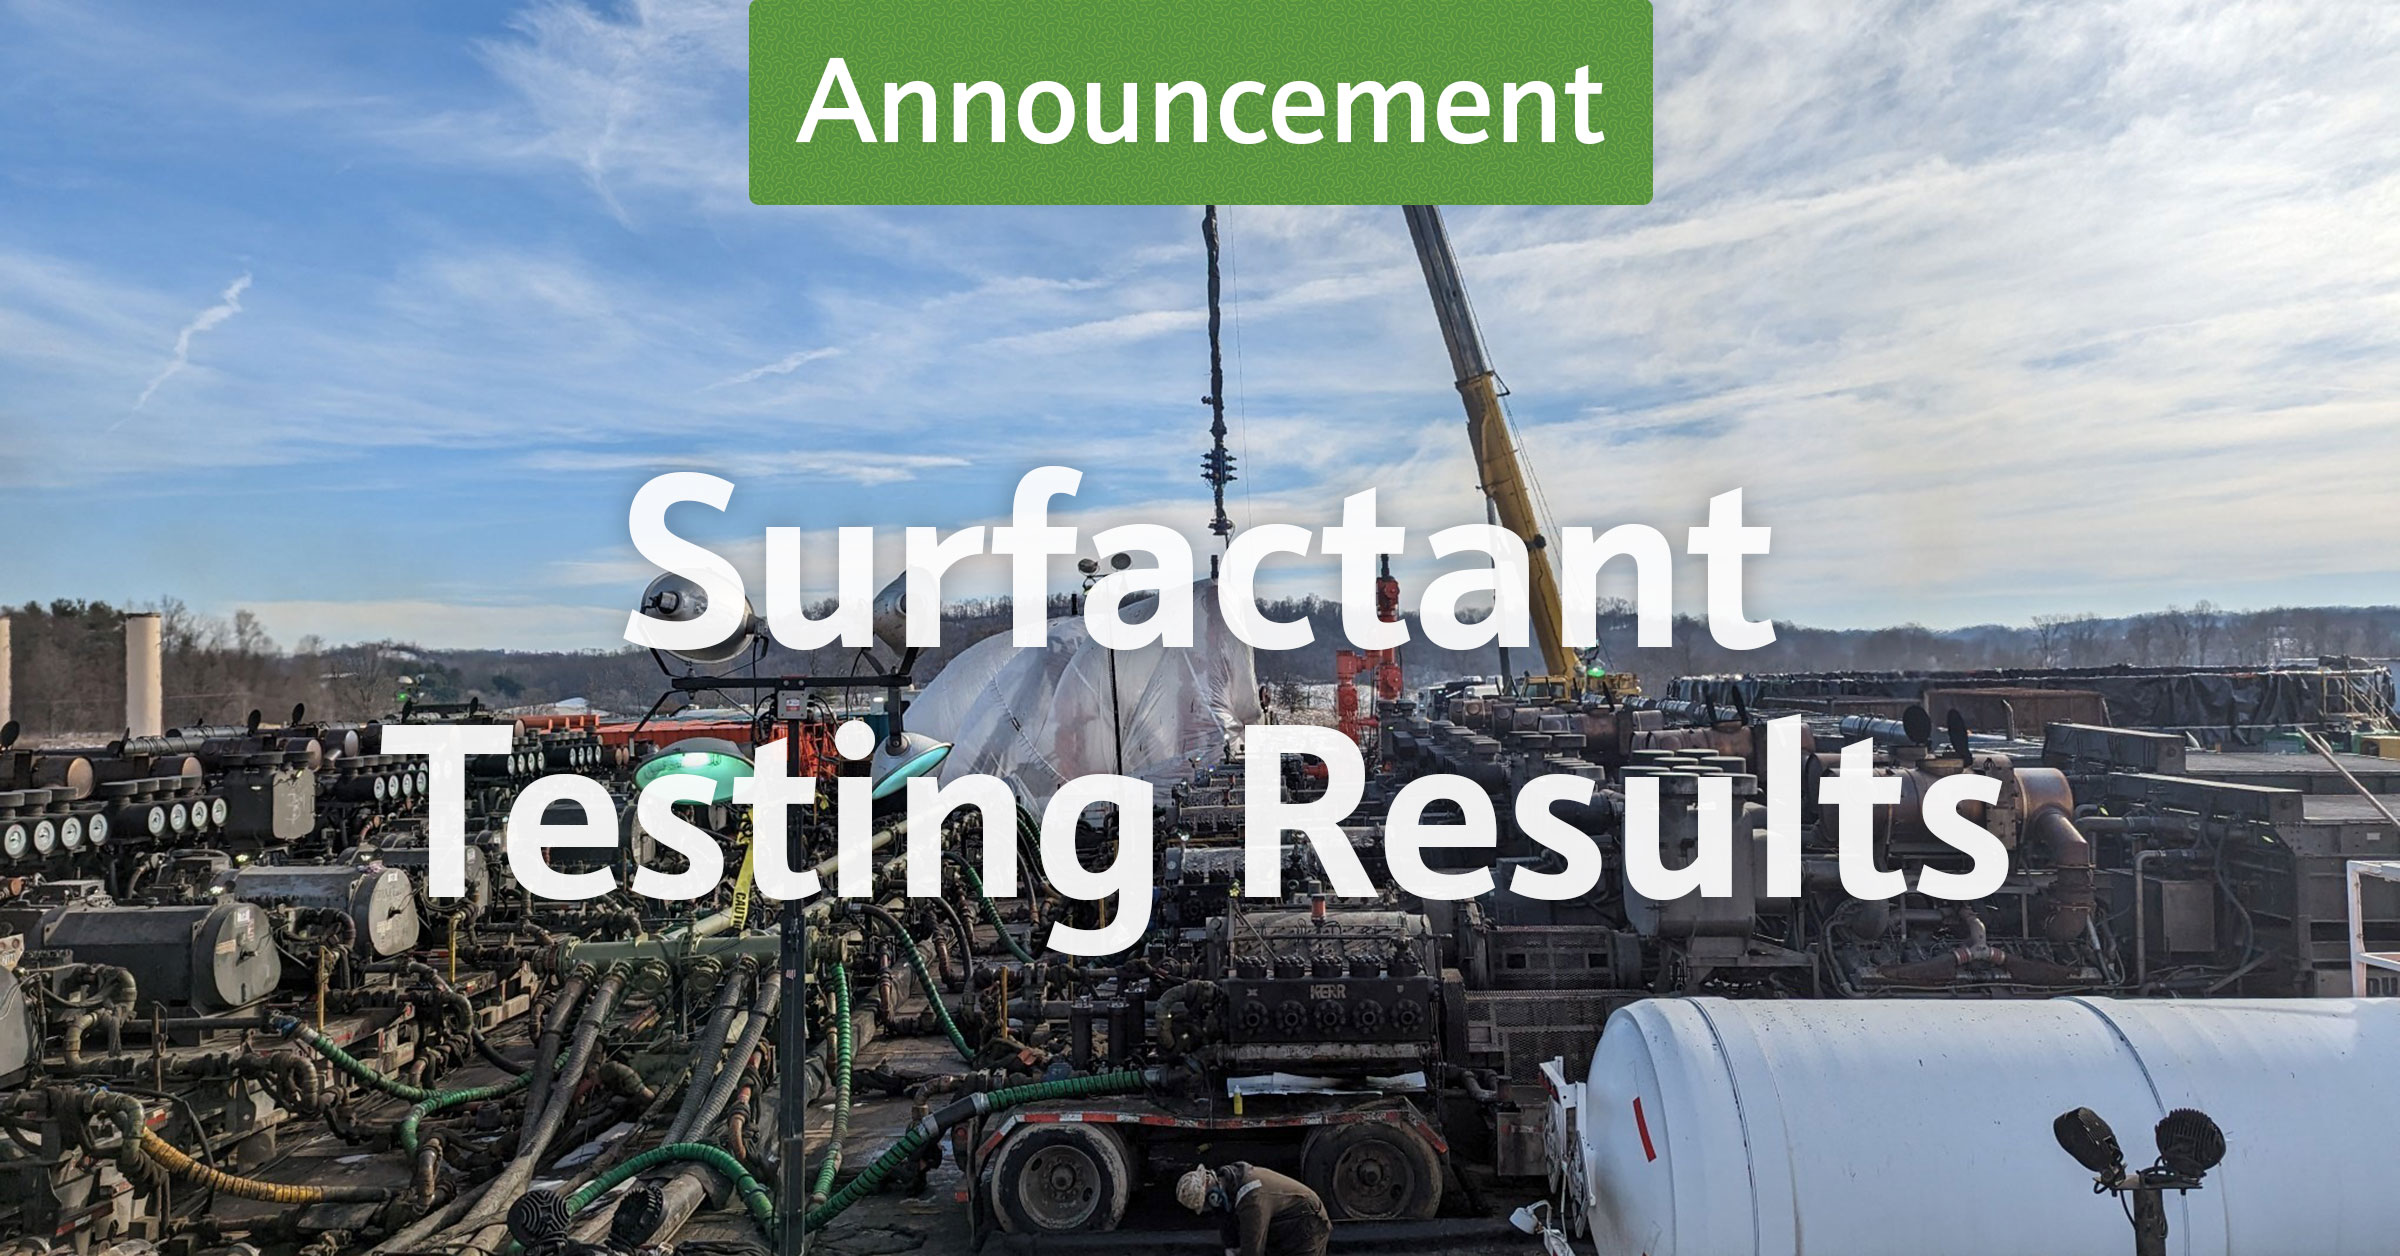 Biosurfactant Selected for Utica Shale Completion Program After Outperforming Top Surfactants in Third-Party Testing